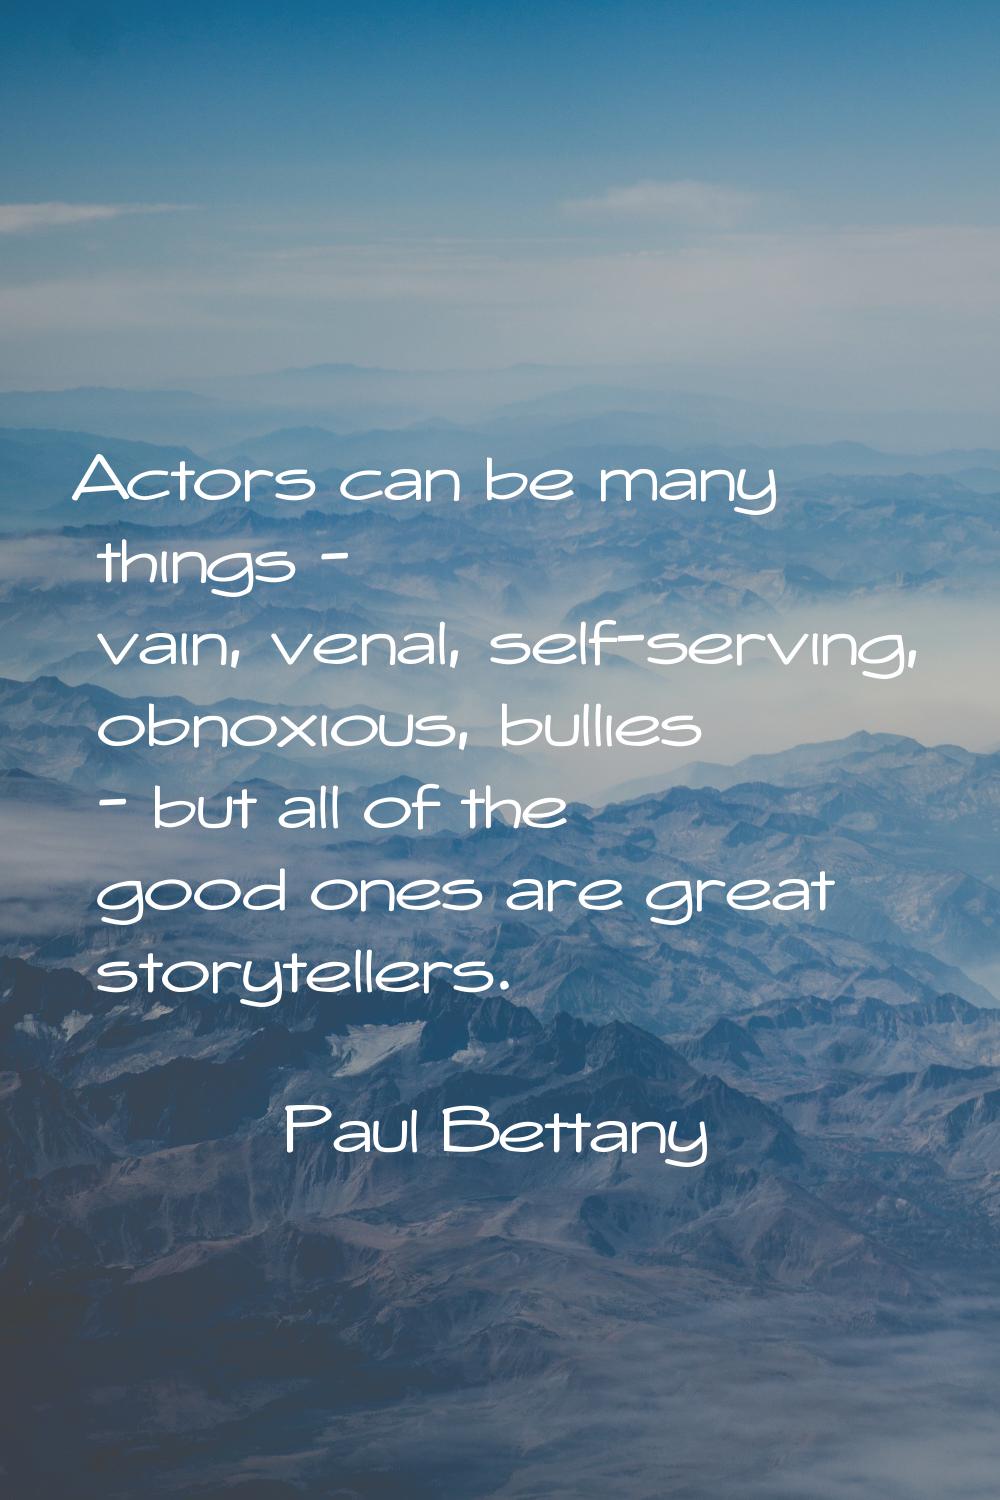 Actors can be many things - vain, venal, self-serving, obnoxious, bullies - but all of the good one